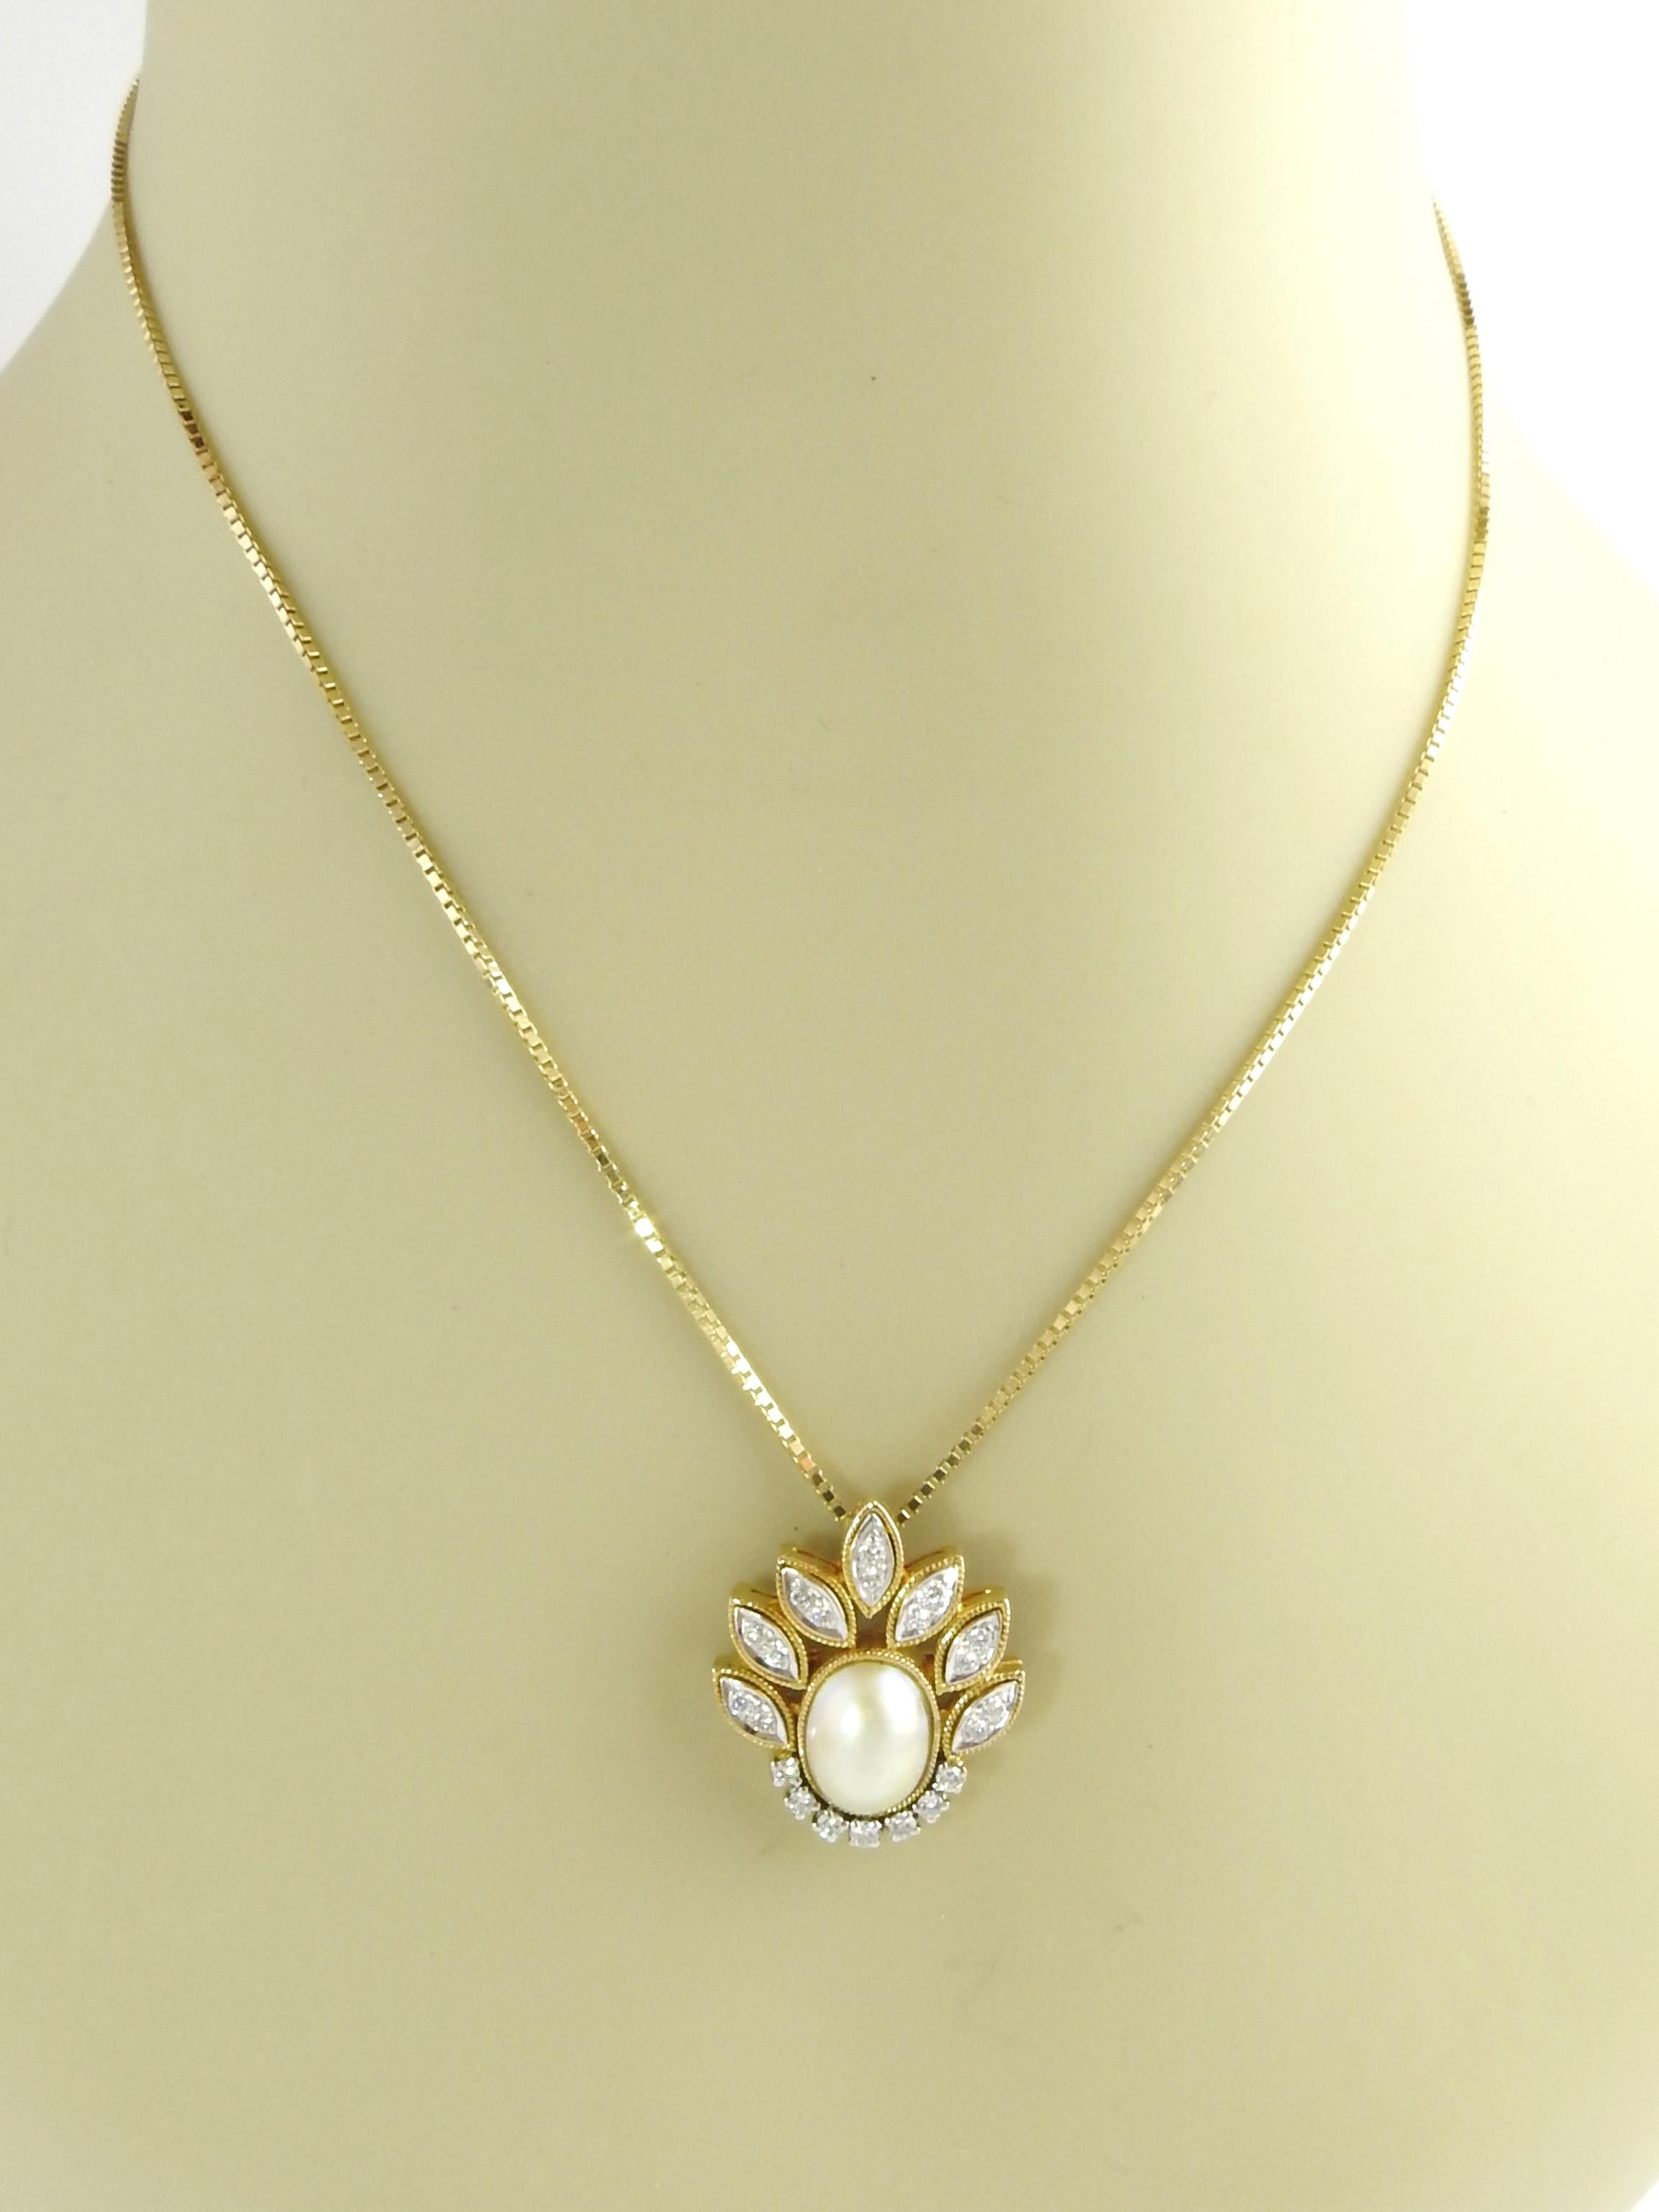 14 Karat Yellow Gold Mabe Pearl and Diamond Pendant Necklace For Sale 3